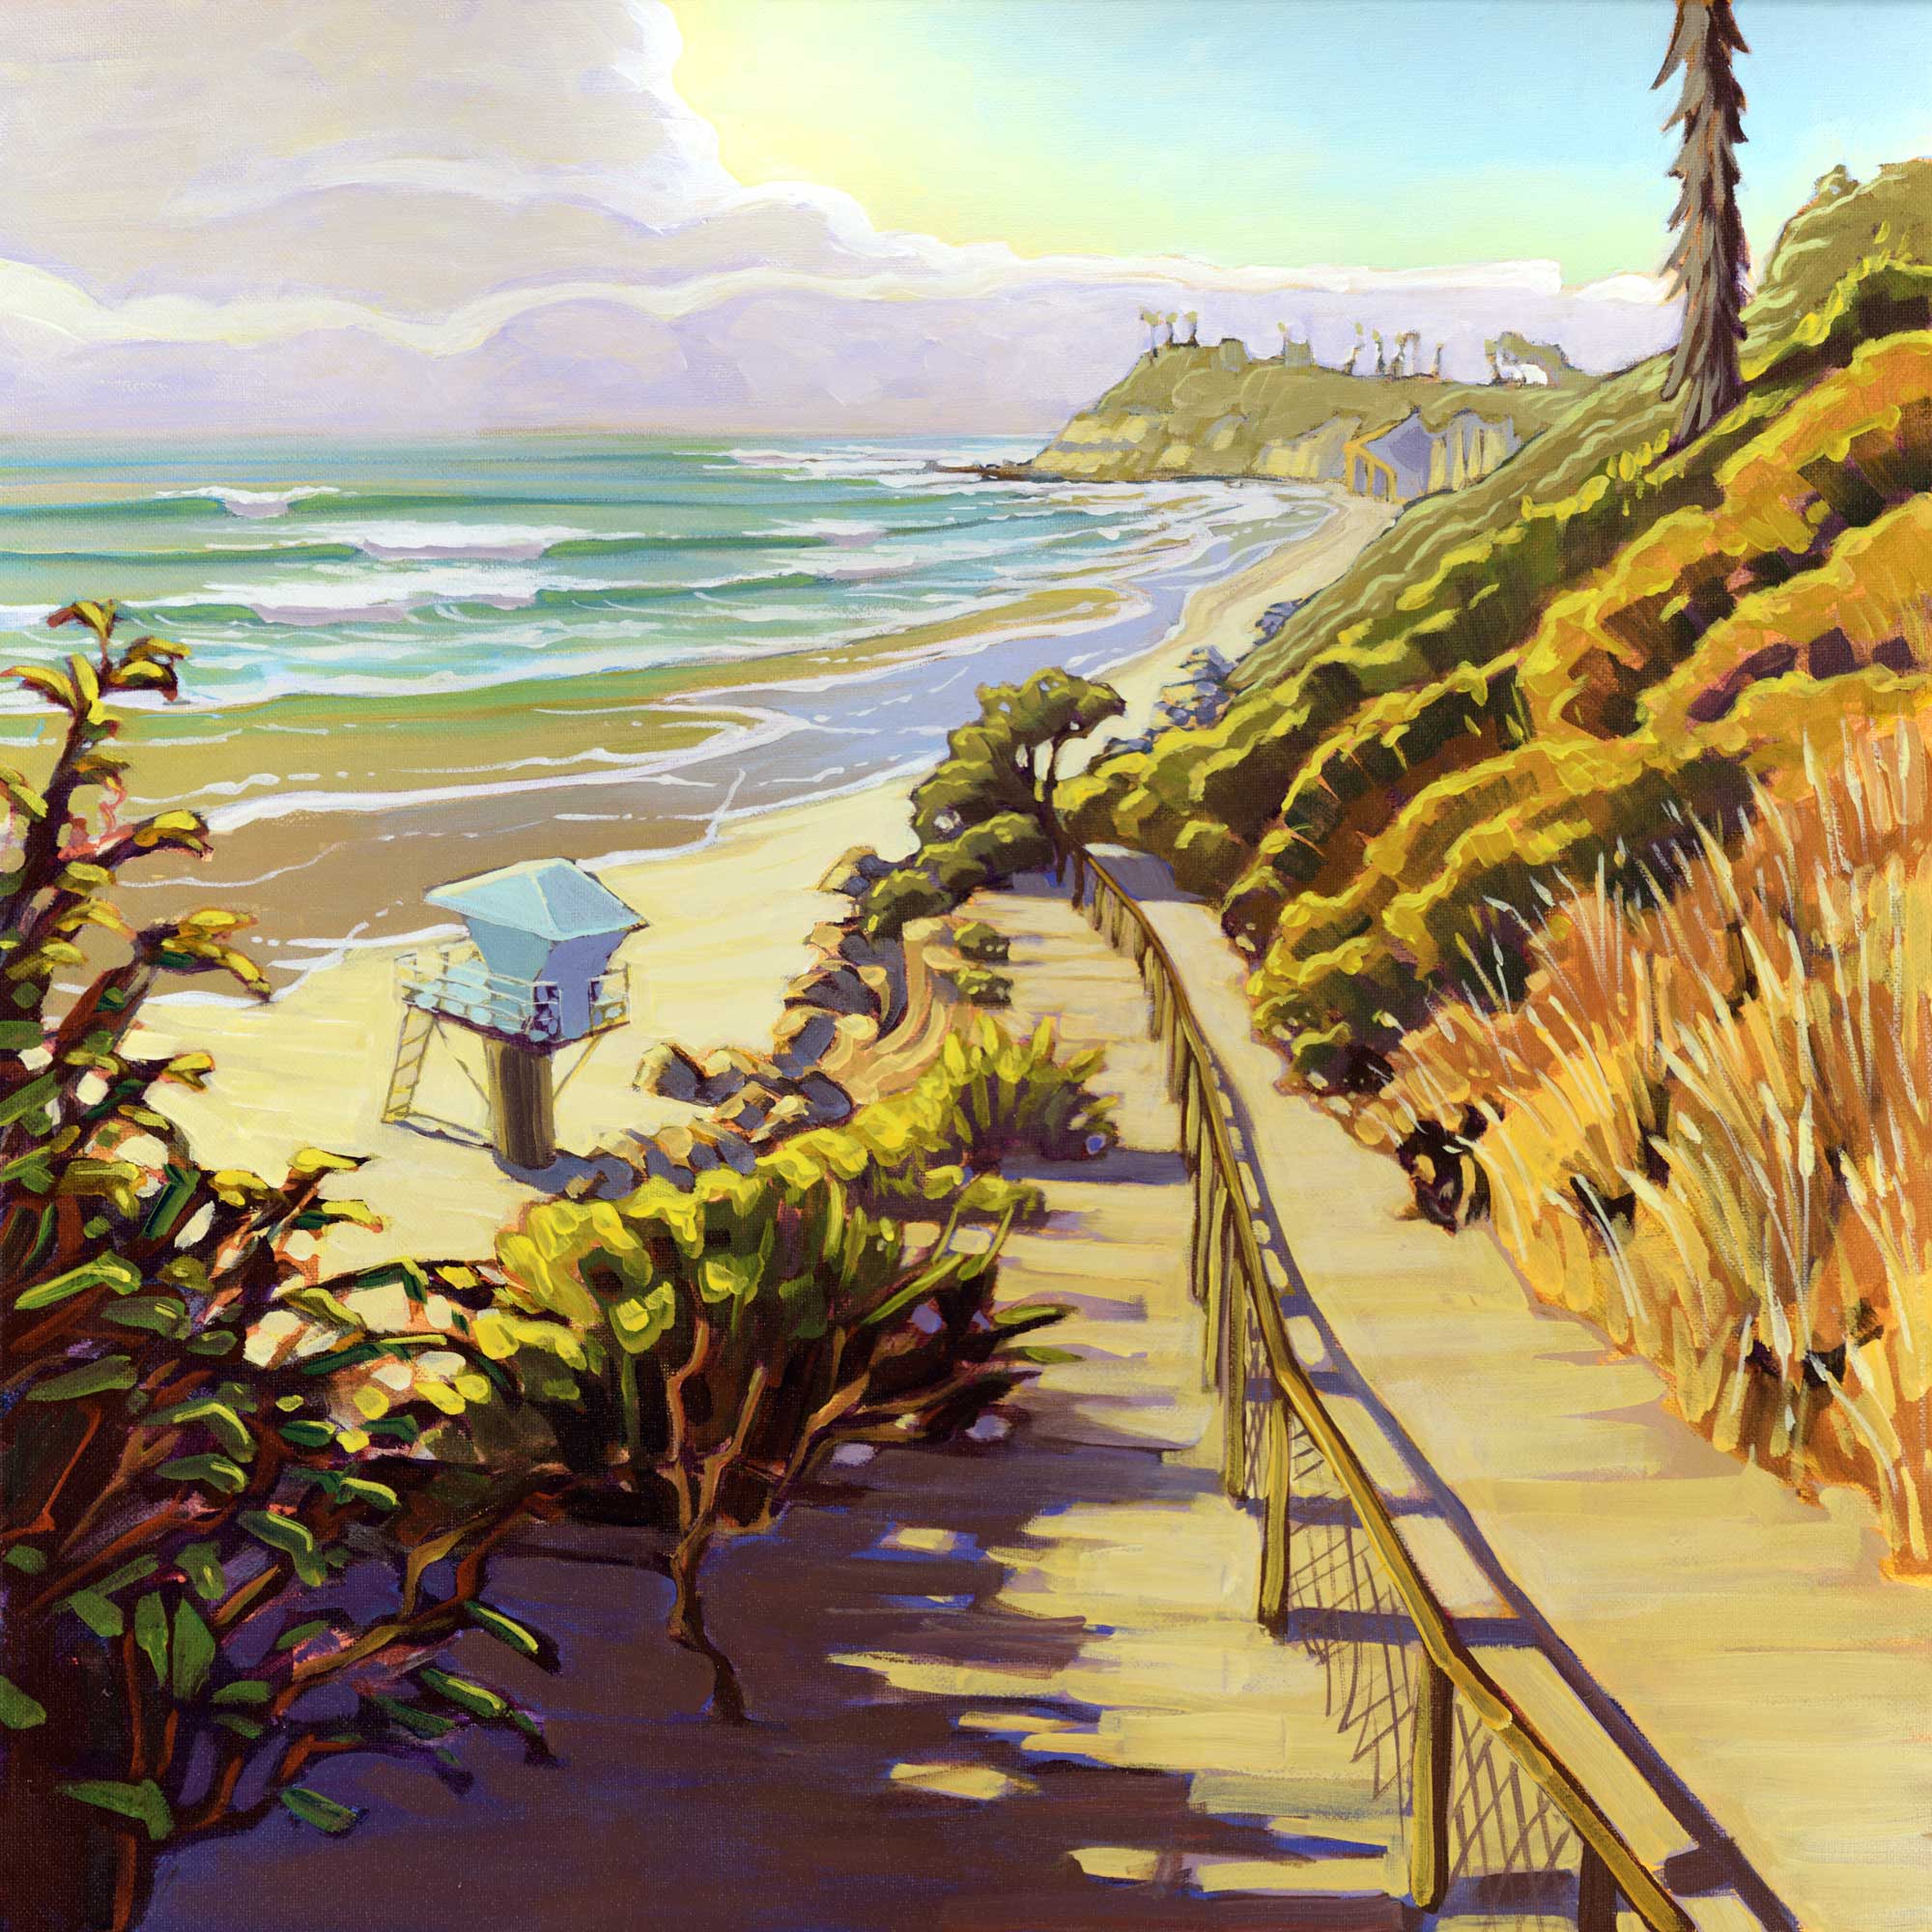 Plein air artwork from the path to Pipes at San Elijo State Park on the San Diego coast of southern California